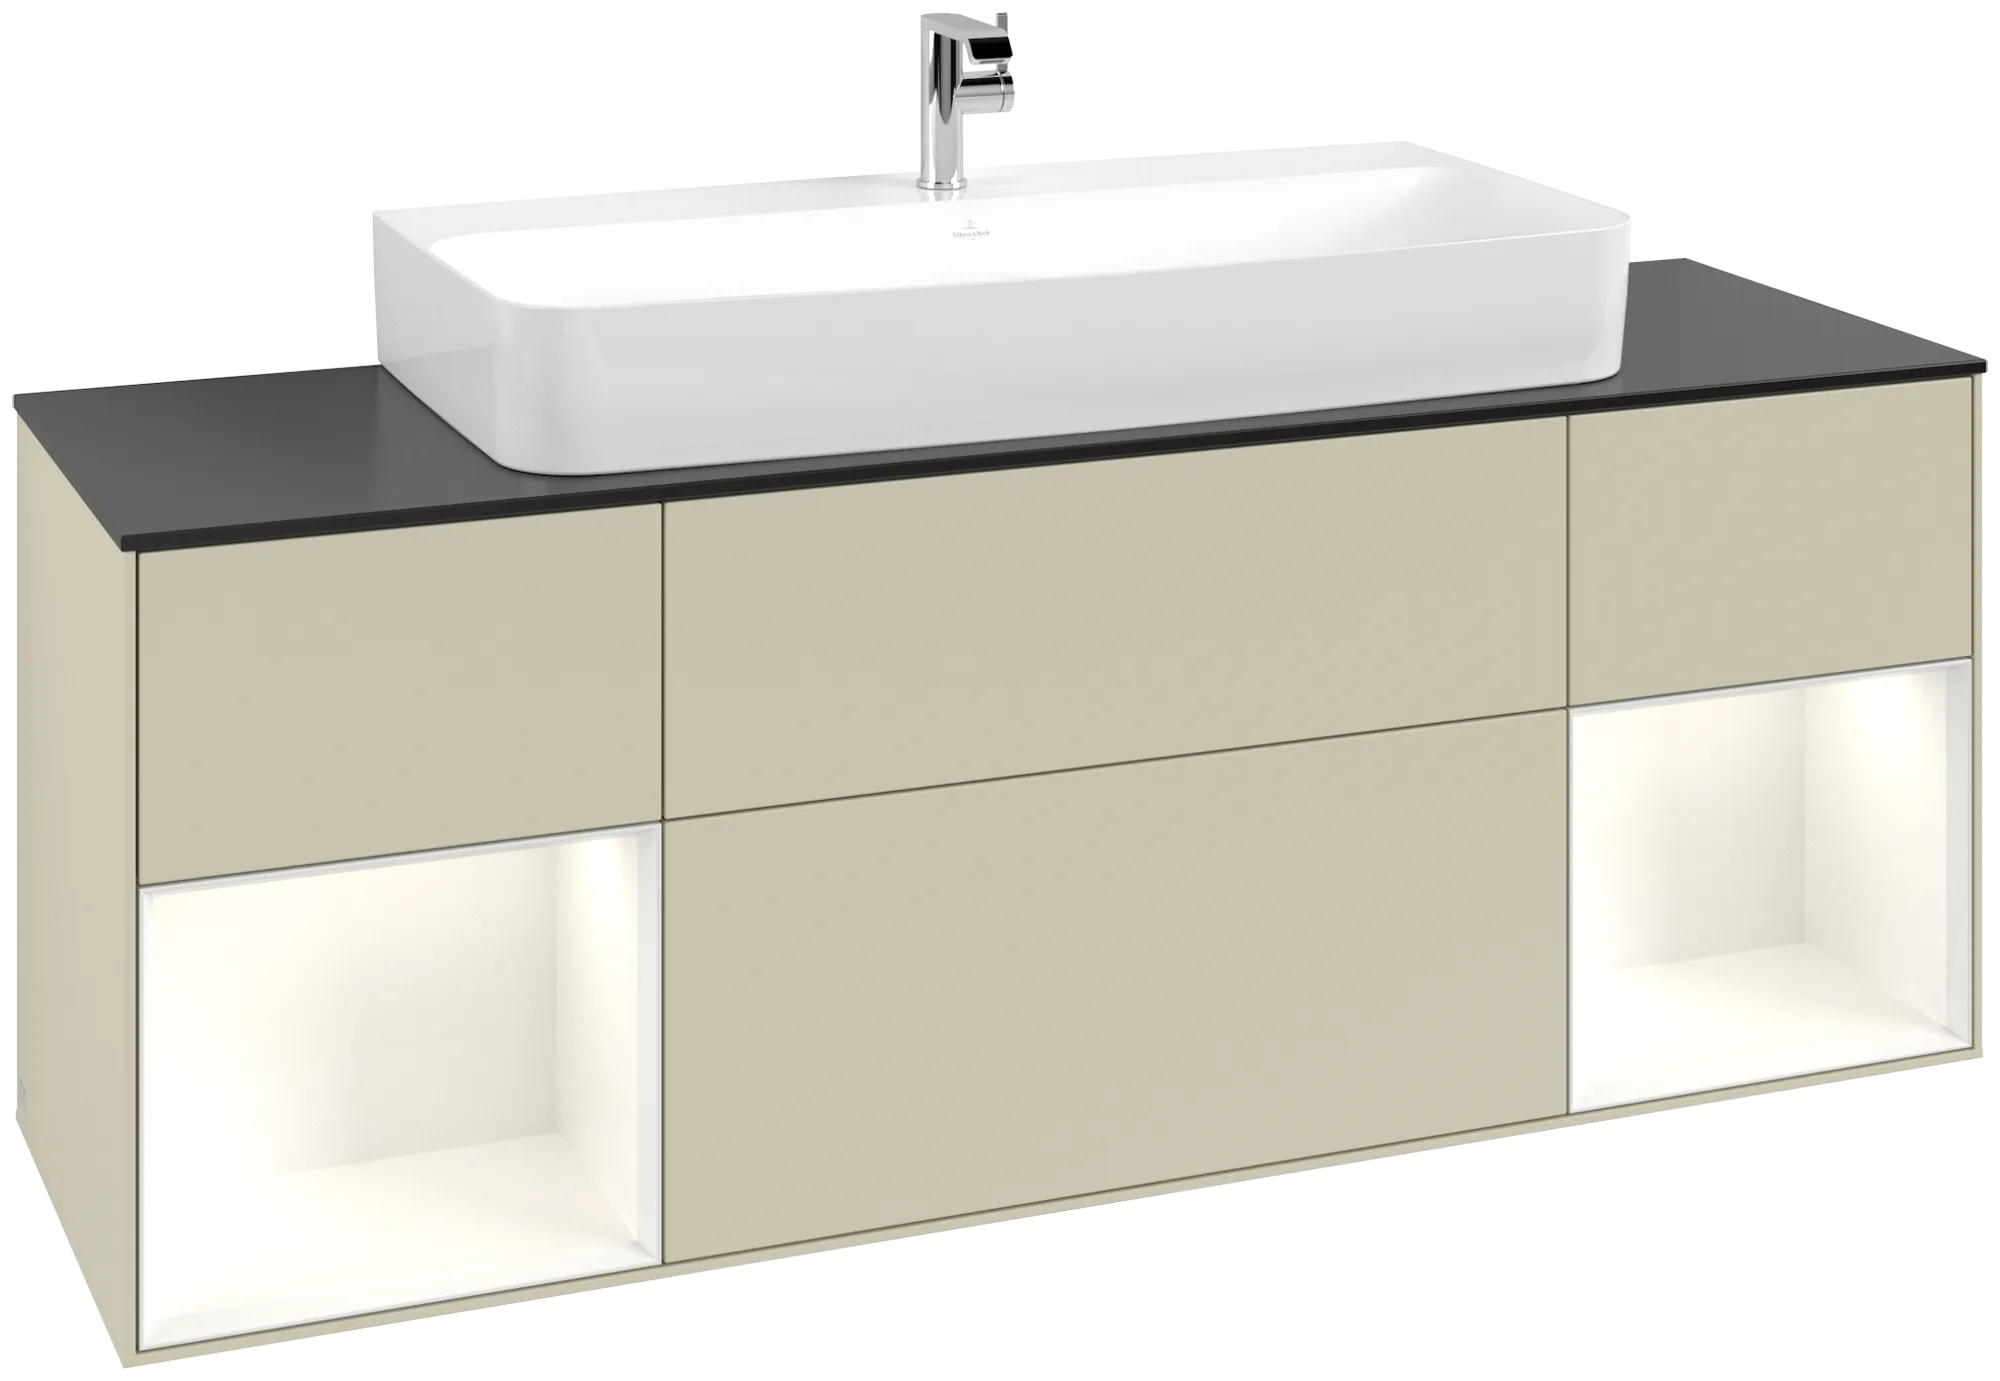 VILLEROY BOCH Finion Vanity unit, with lighting, 4 pull-out compartments, 1600 x 603 x 501 mm, Silk Grey Matt Lacquer / Glossy White Lacquer / Glass Black Matt #G212GFHJ resmi